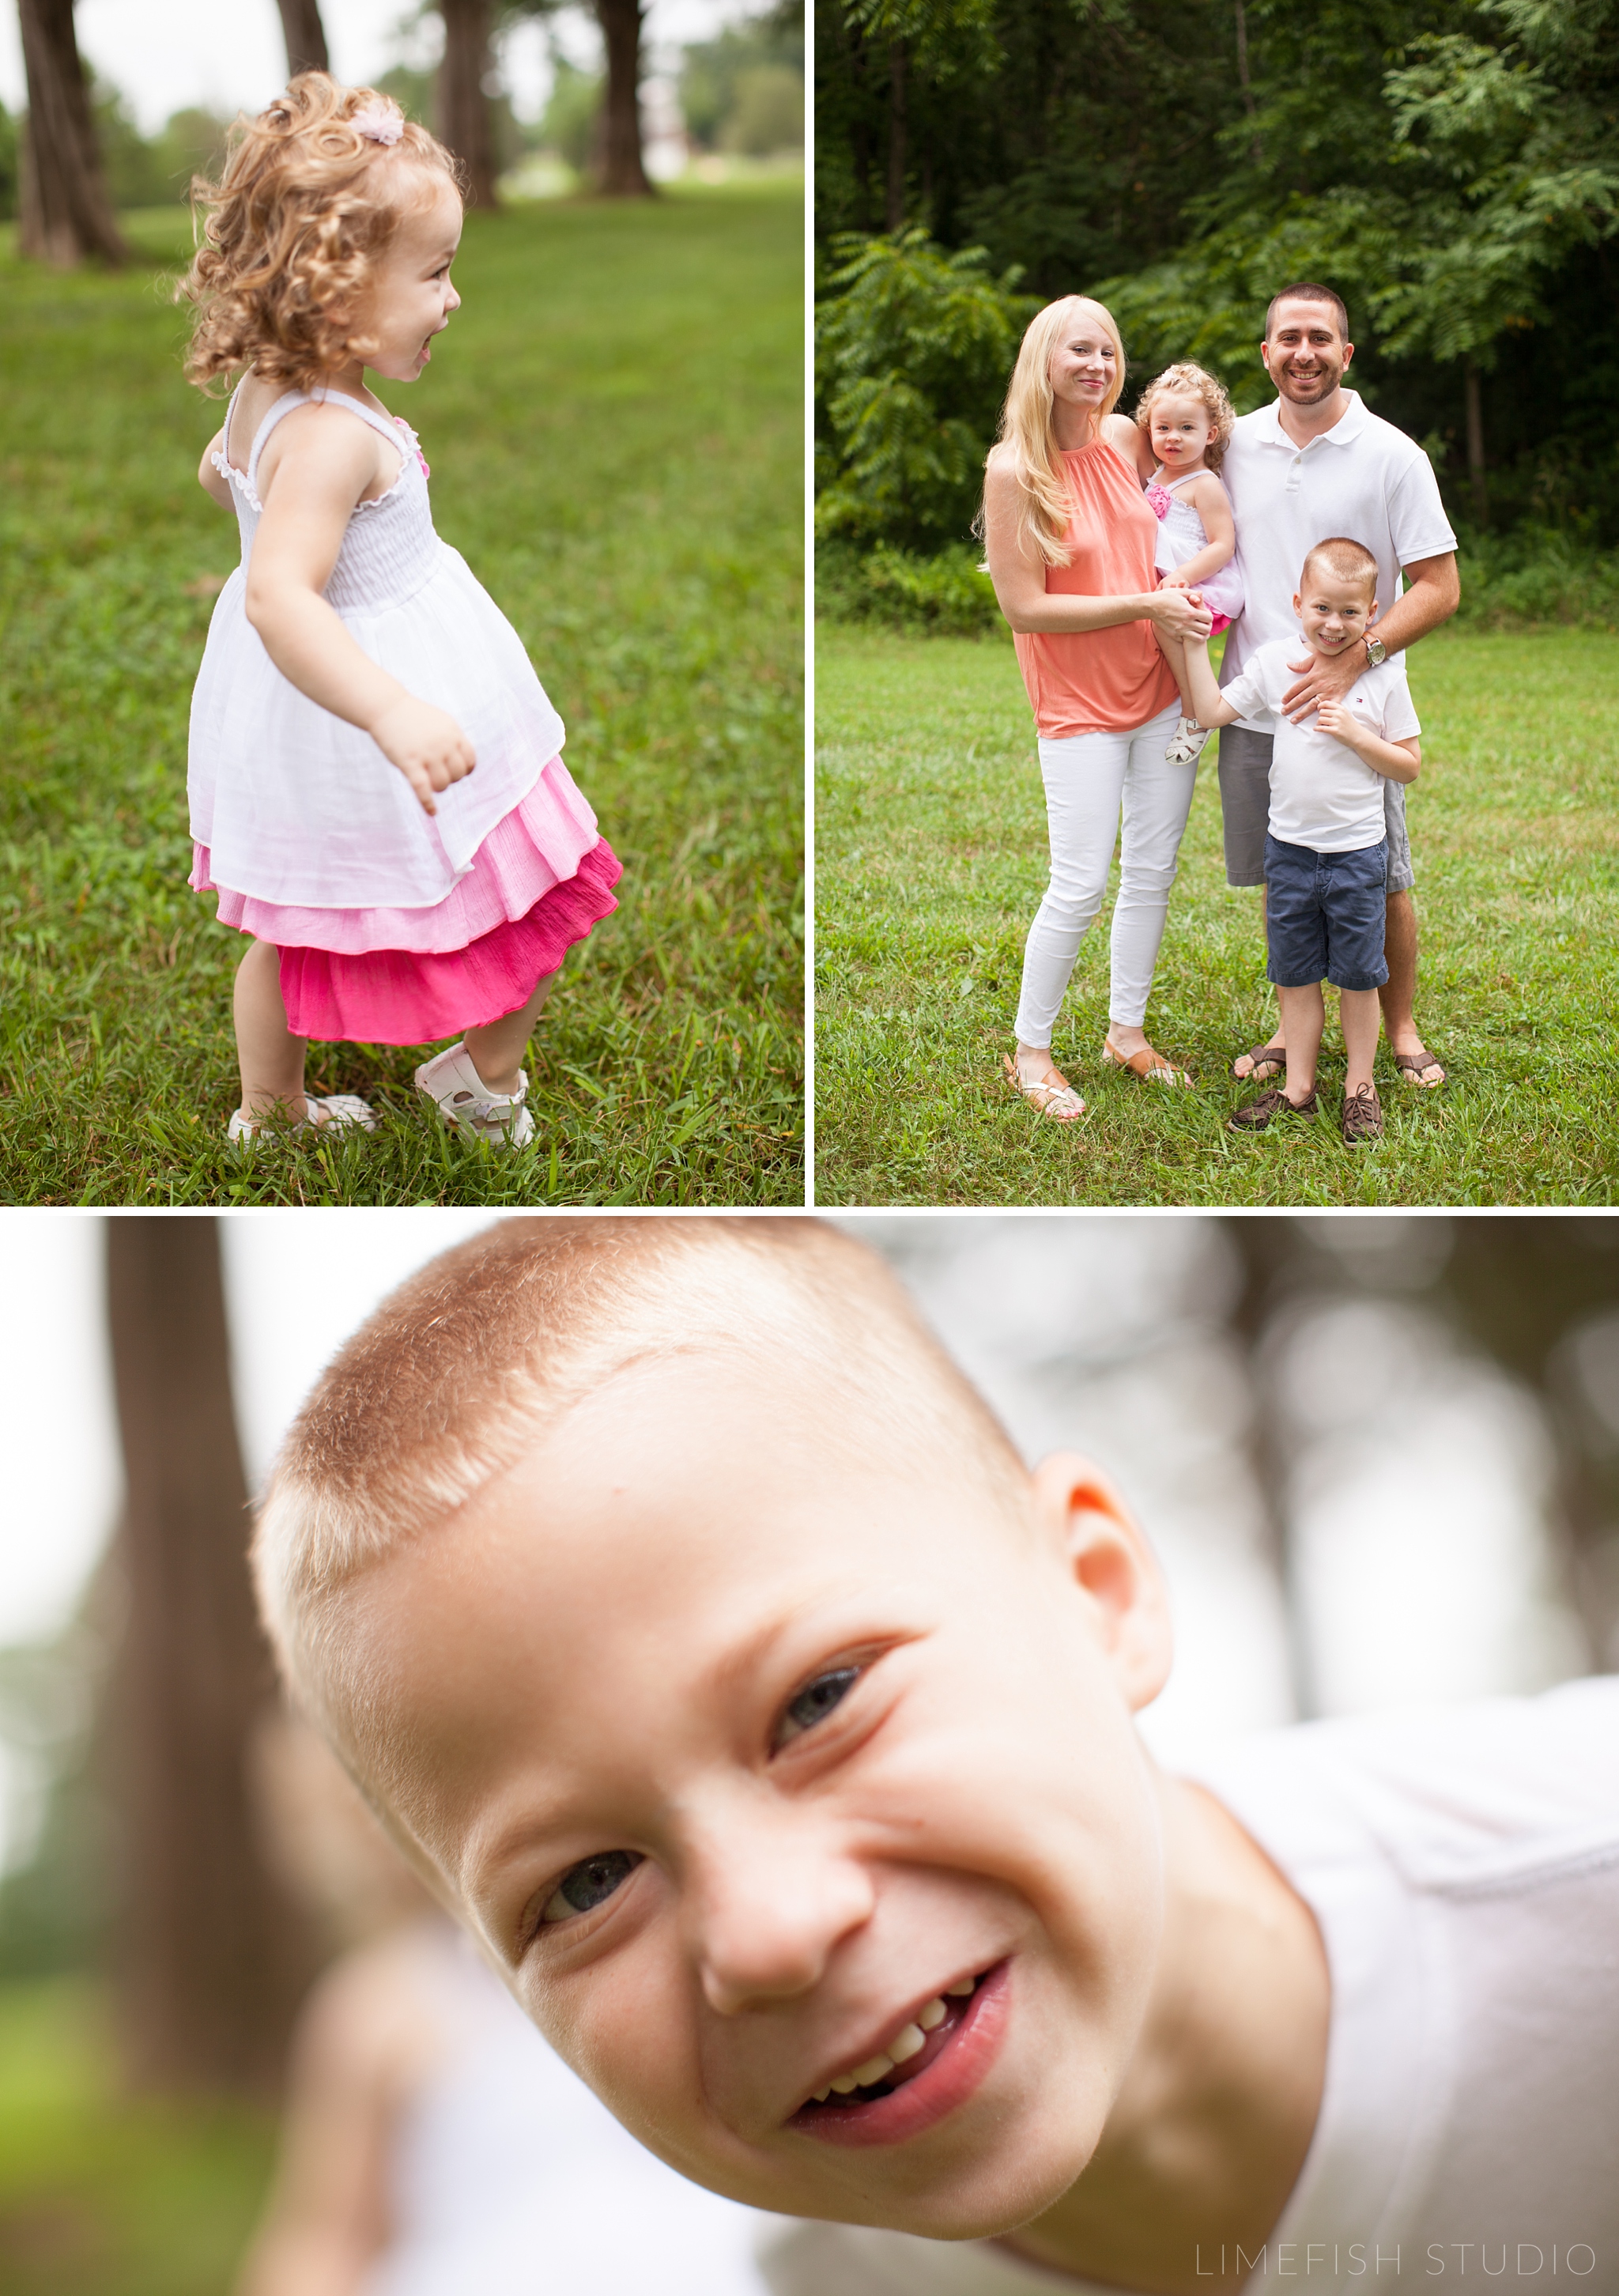 Limefish Studio Photography | Lake Monticello Family Portraits | Two Year Old